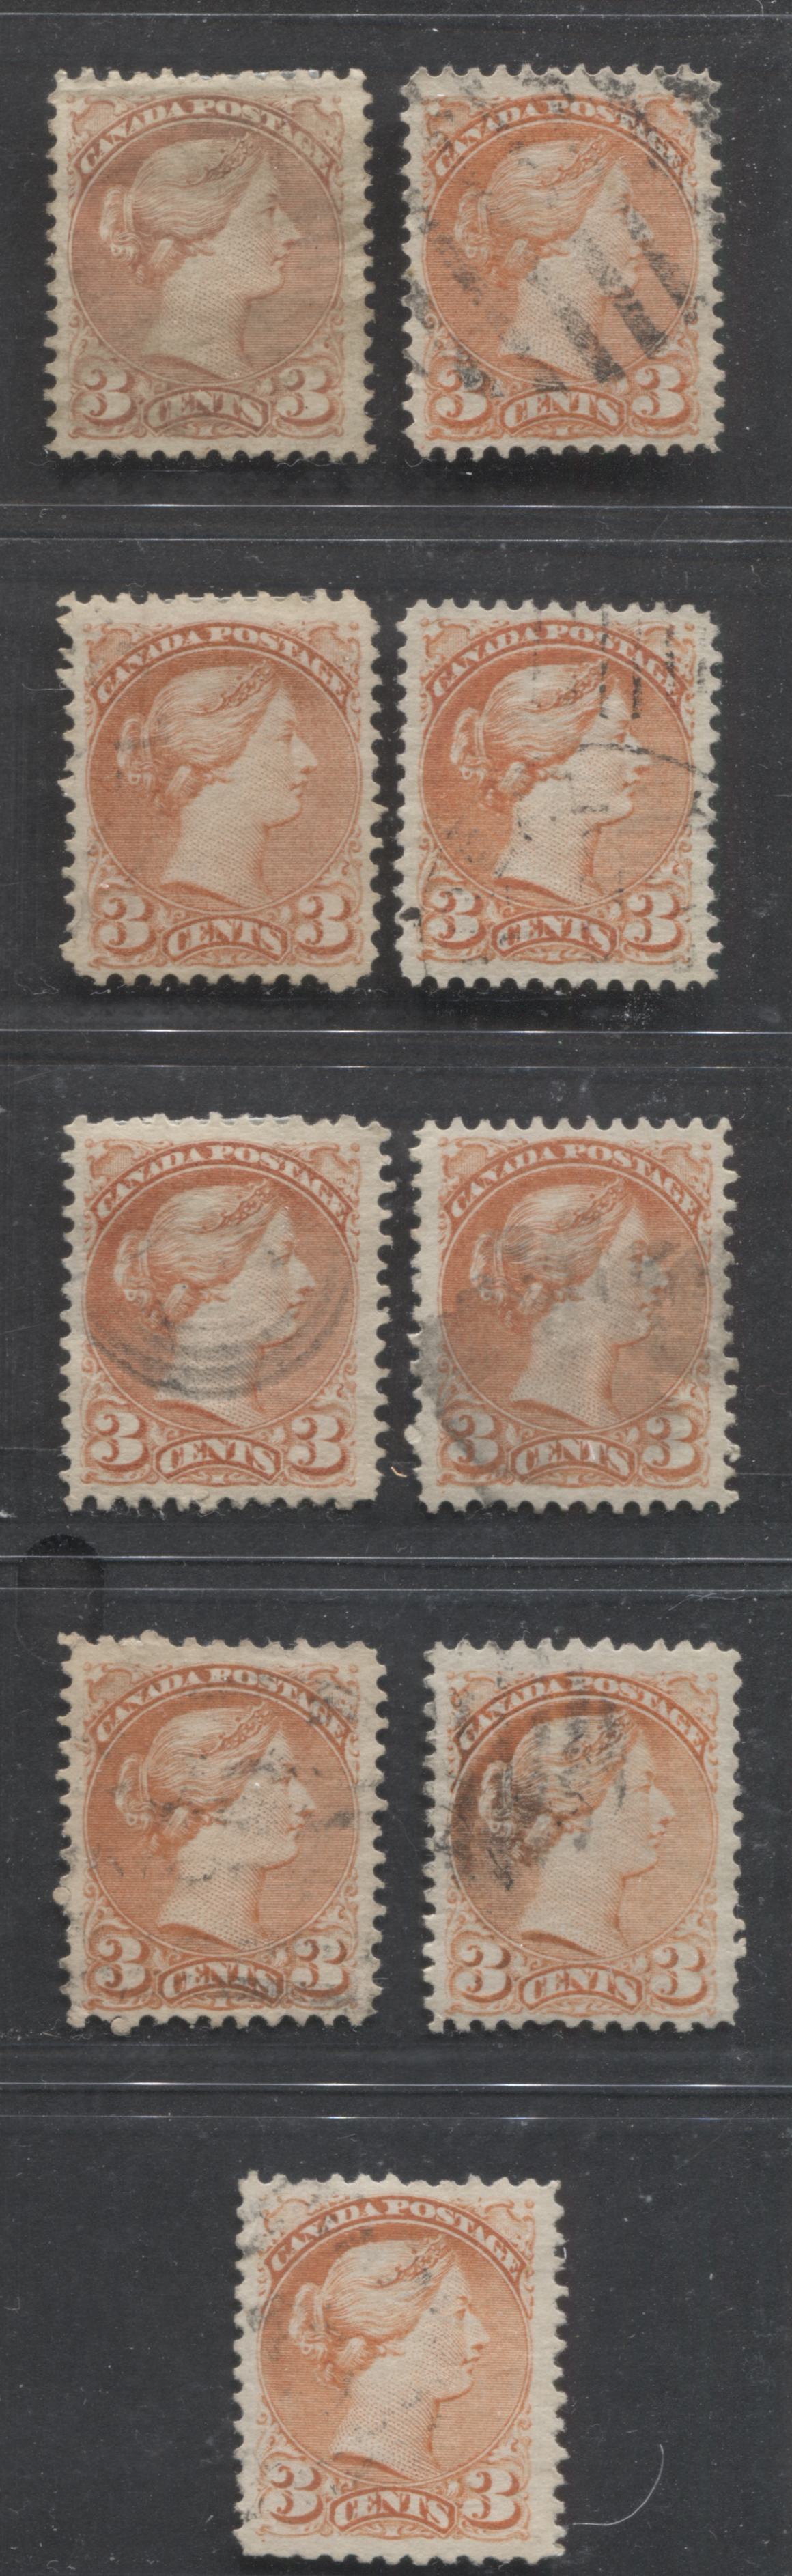 Lot 228 Canada #37c, 37, 37iii 3c Dull Red & Orange Red Queen Victoria, 1870-1897 Small Queen Issue, 9 Fine & VF Used Singles, All Montreal Printings, Perf. 12 and 11.75 x 12